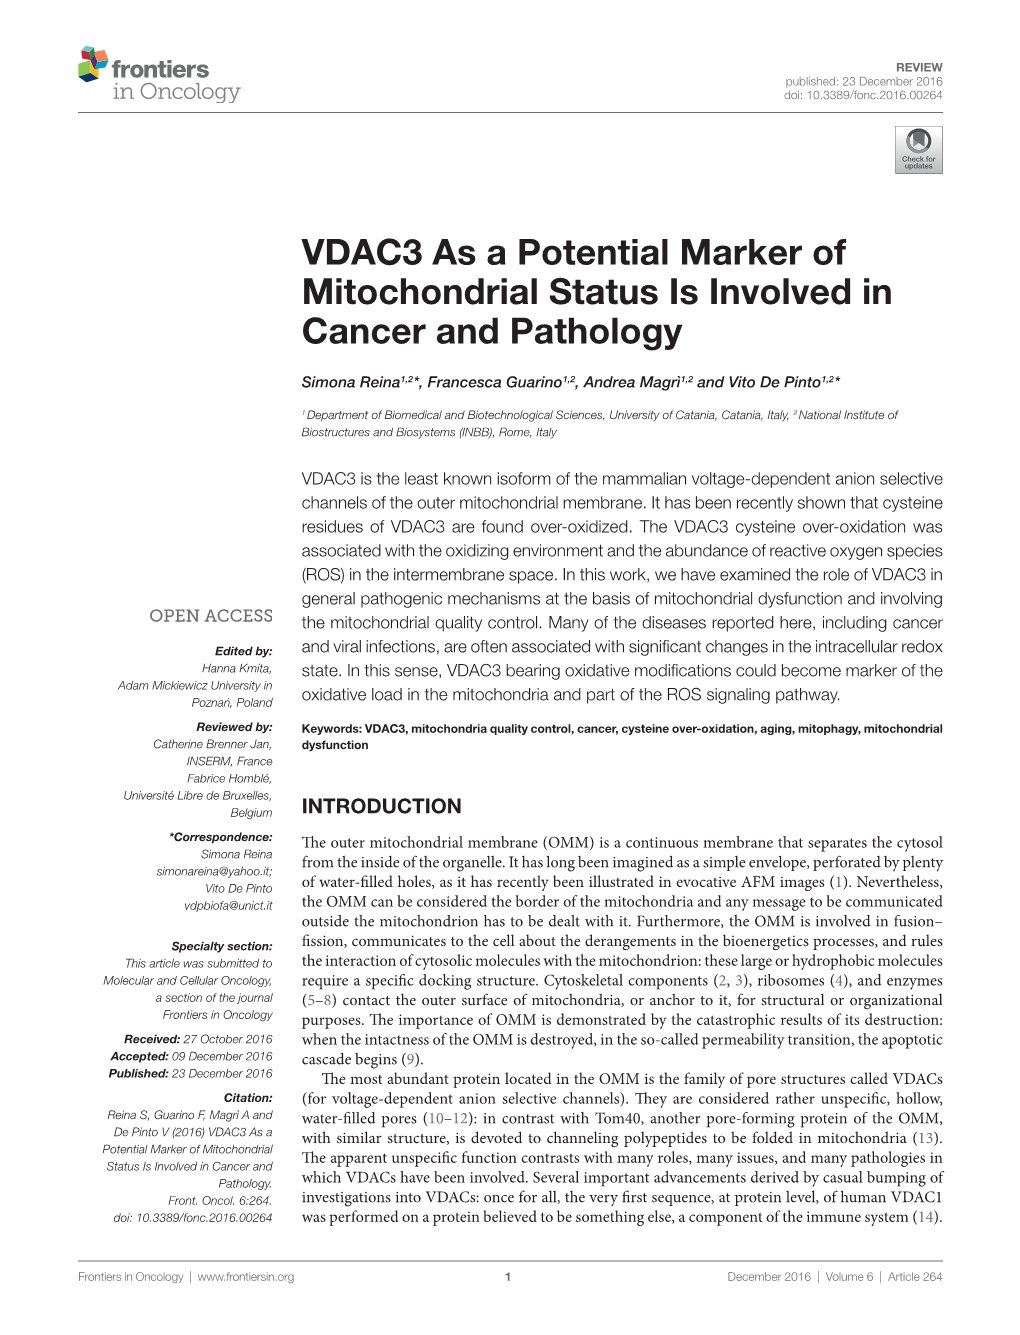 Vdac3 As a Potential Marker of Mitochondrial Status Is Involved in Cancer and Pathology